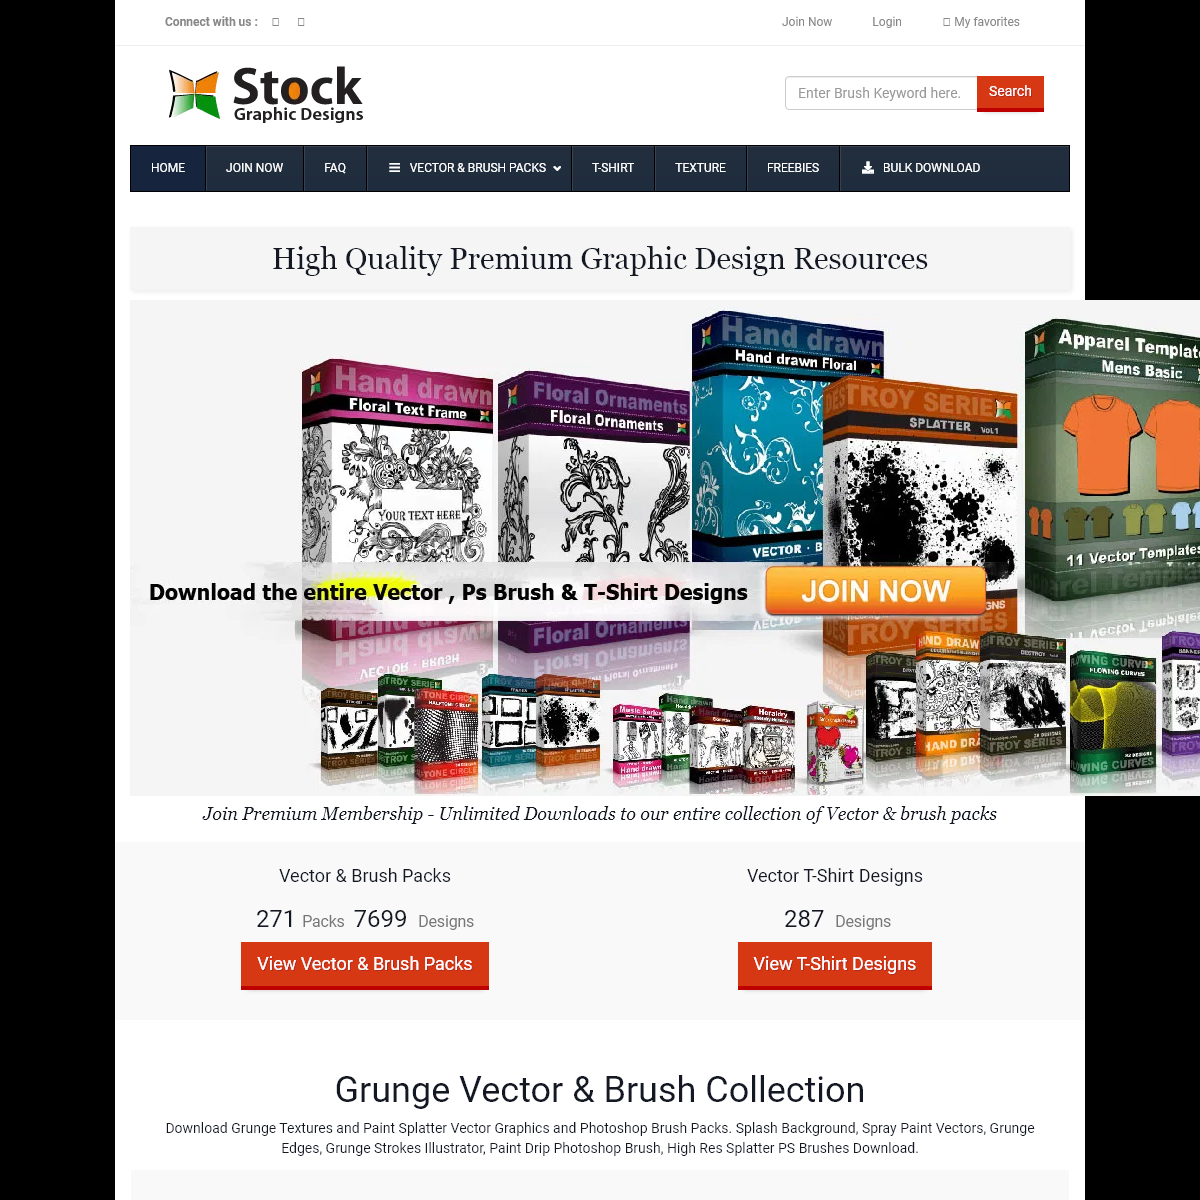 A complete backup of stockgraphicdesigns.com